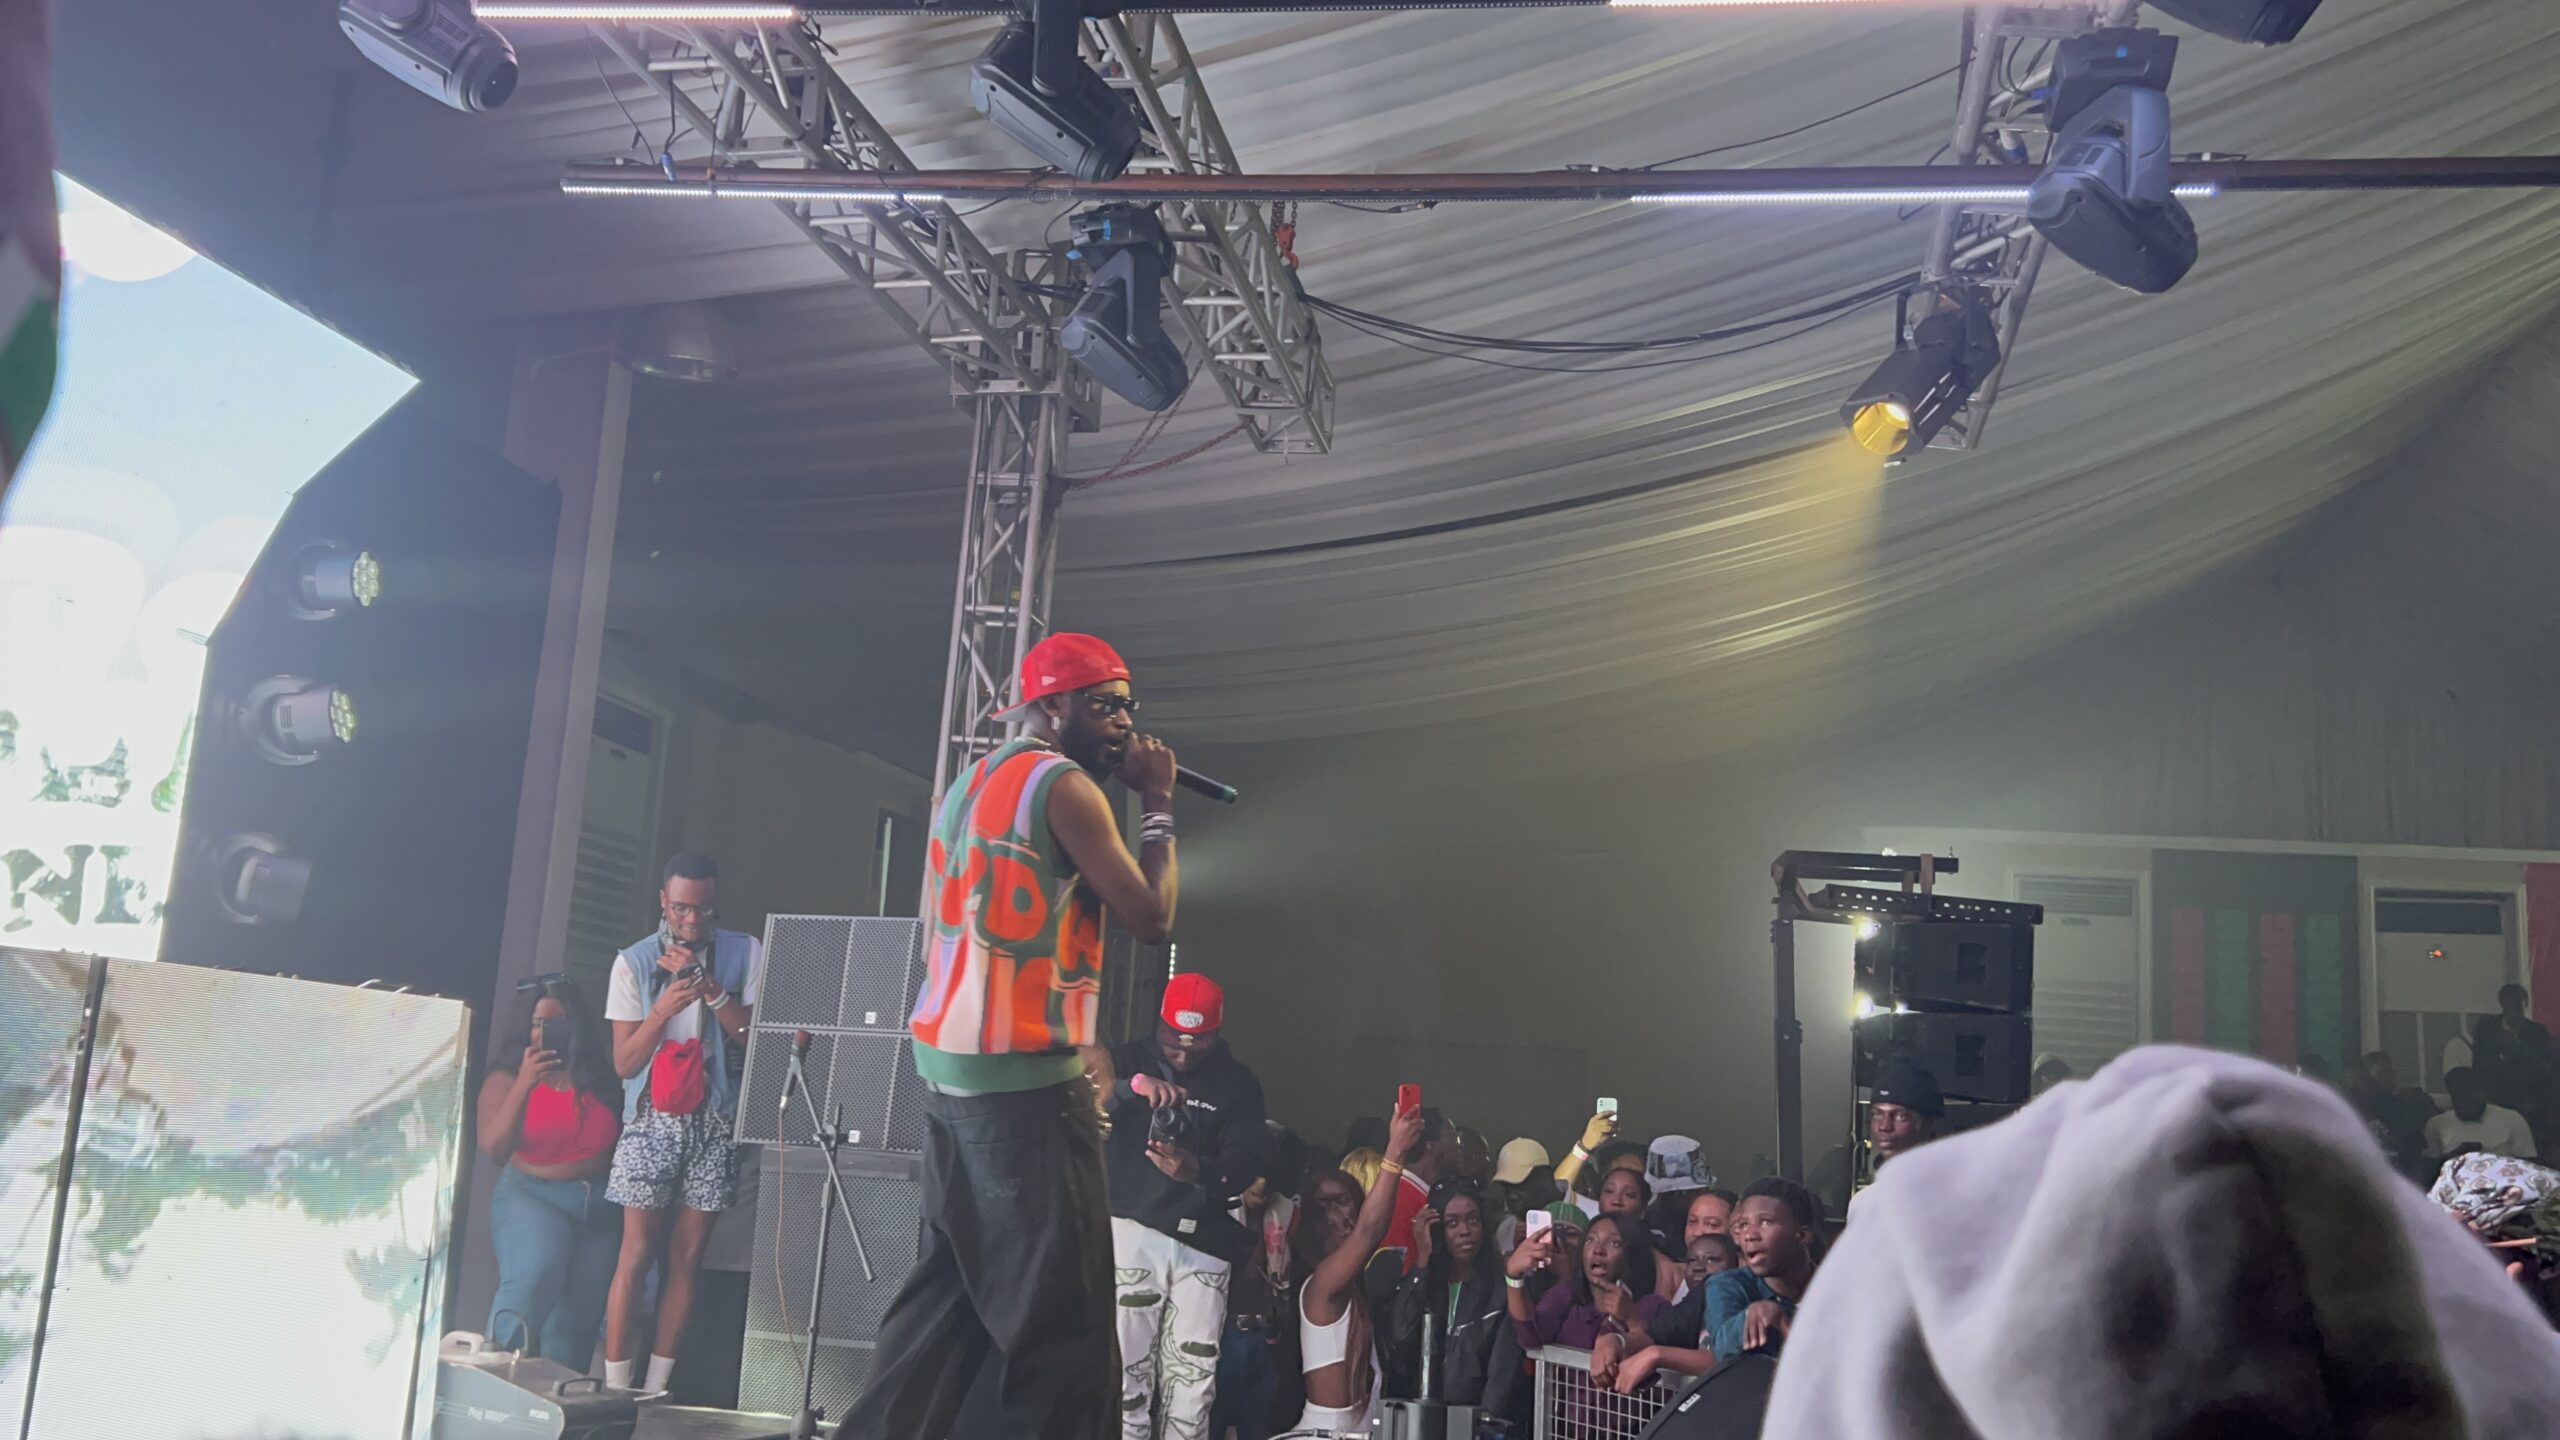 BOJ thrilling fans at Homecoming Festival held at the Harbour Point centre, in Victoria Island, Lagos